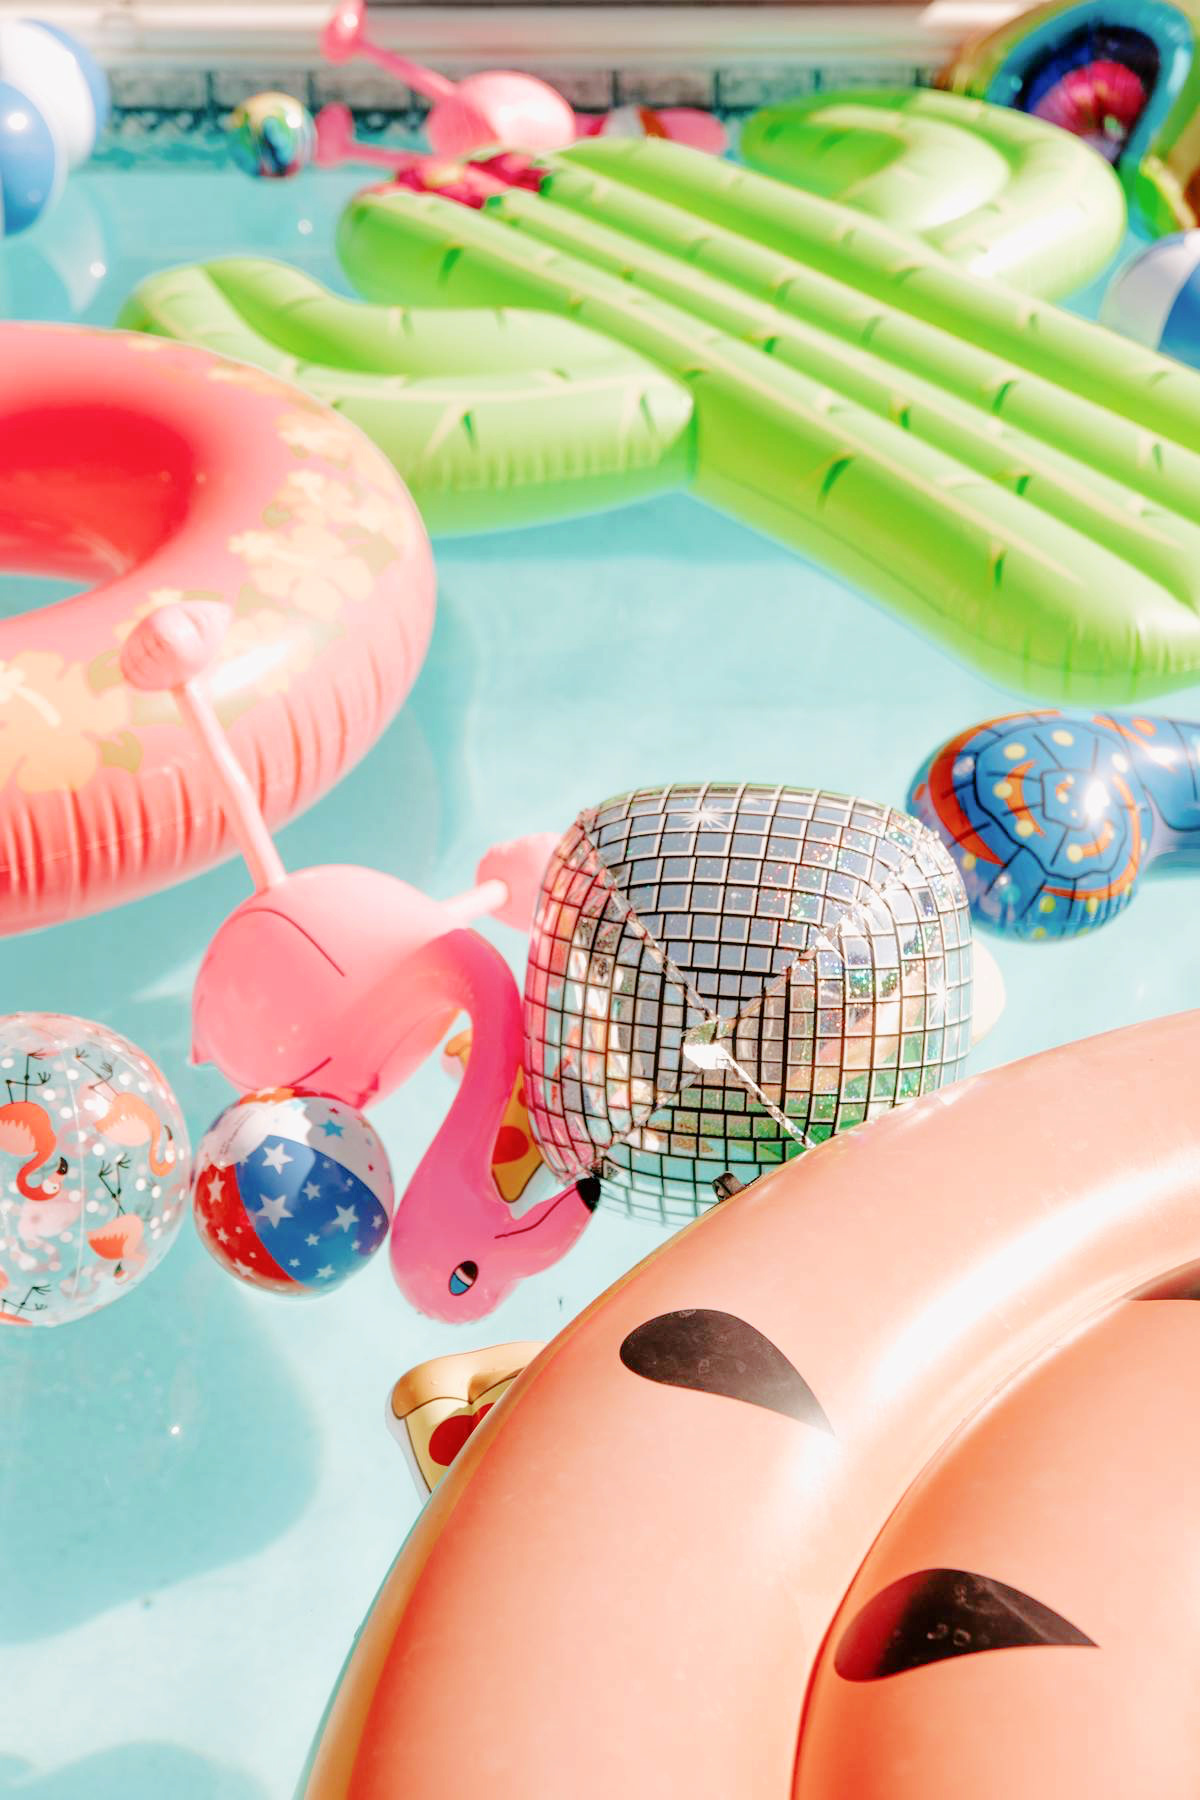 Best Party Themes for Adults - Pool Parties